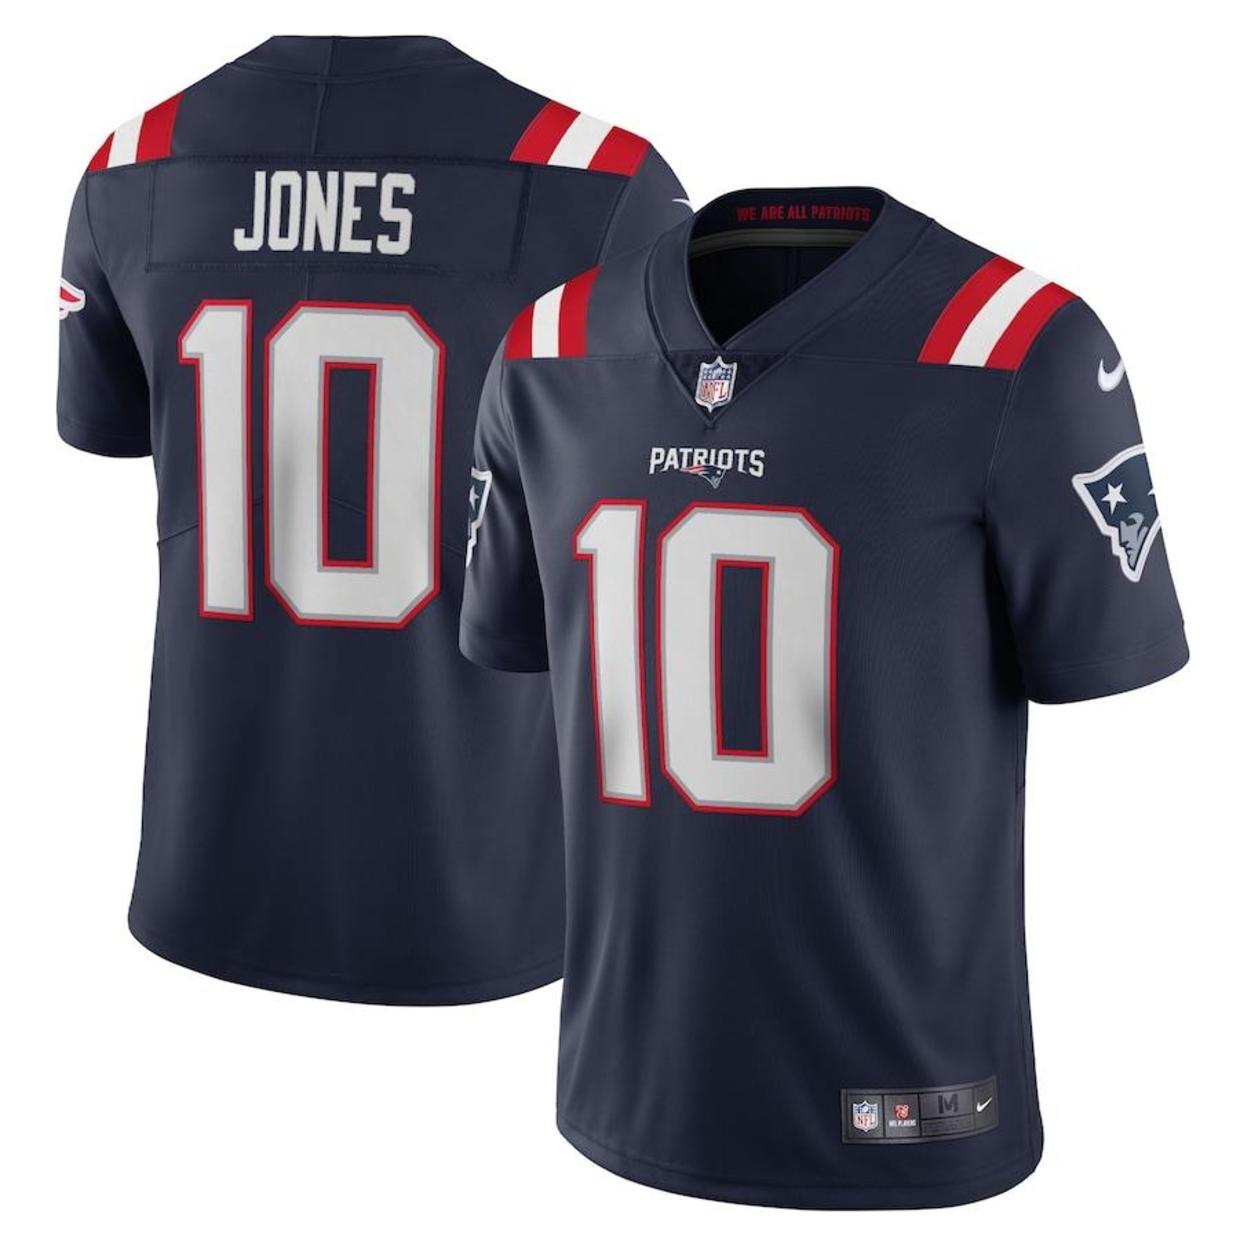 The top 10 NFL jerseys of 2022: The most popular football players of ...